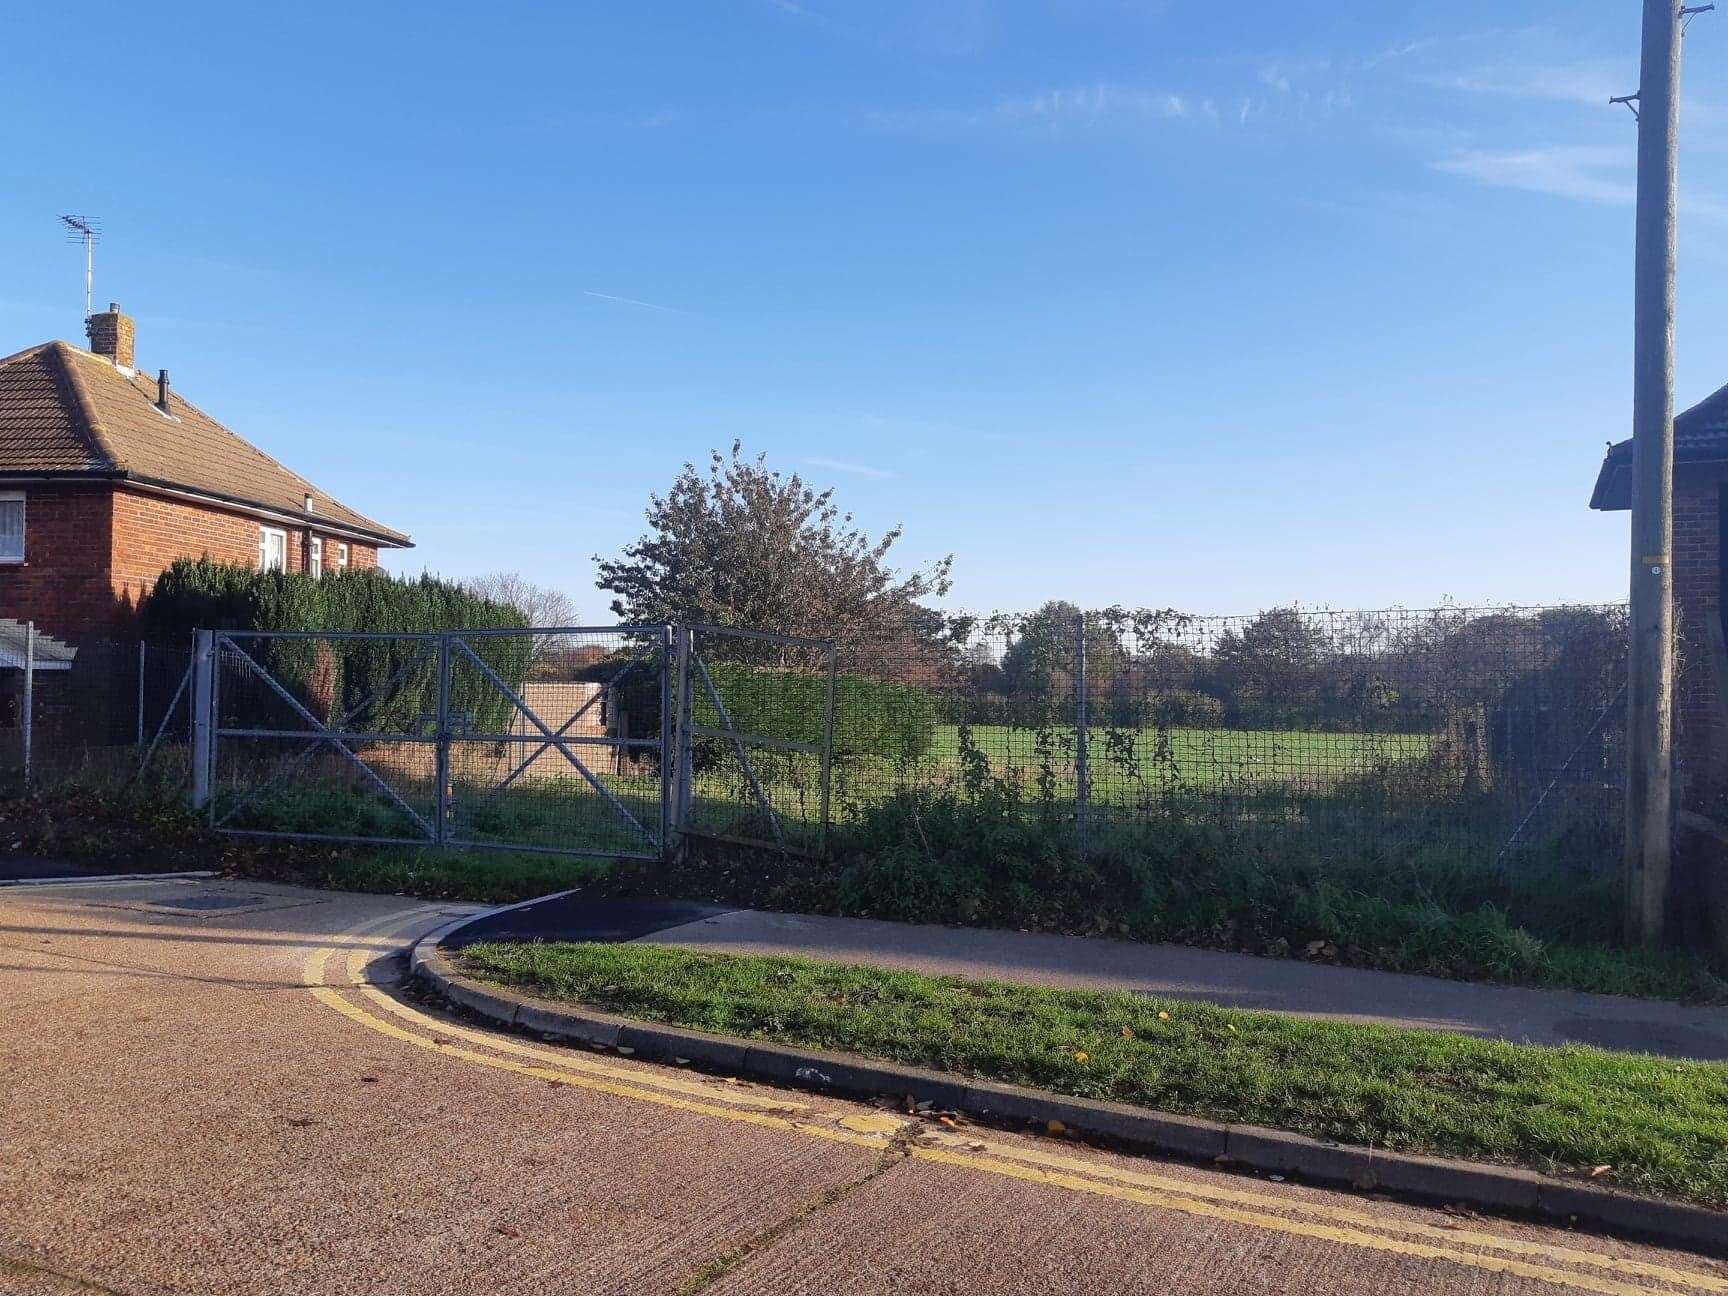 The plans are for 88 homes at the field off Freemens Way in Deal